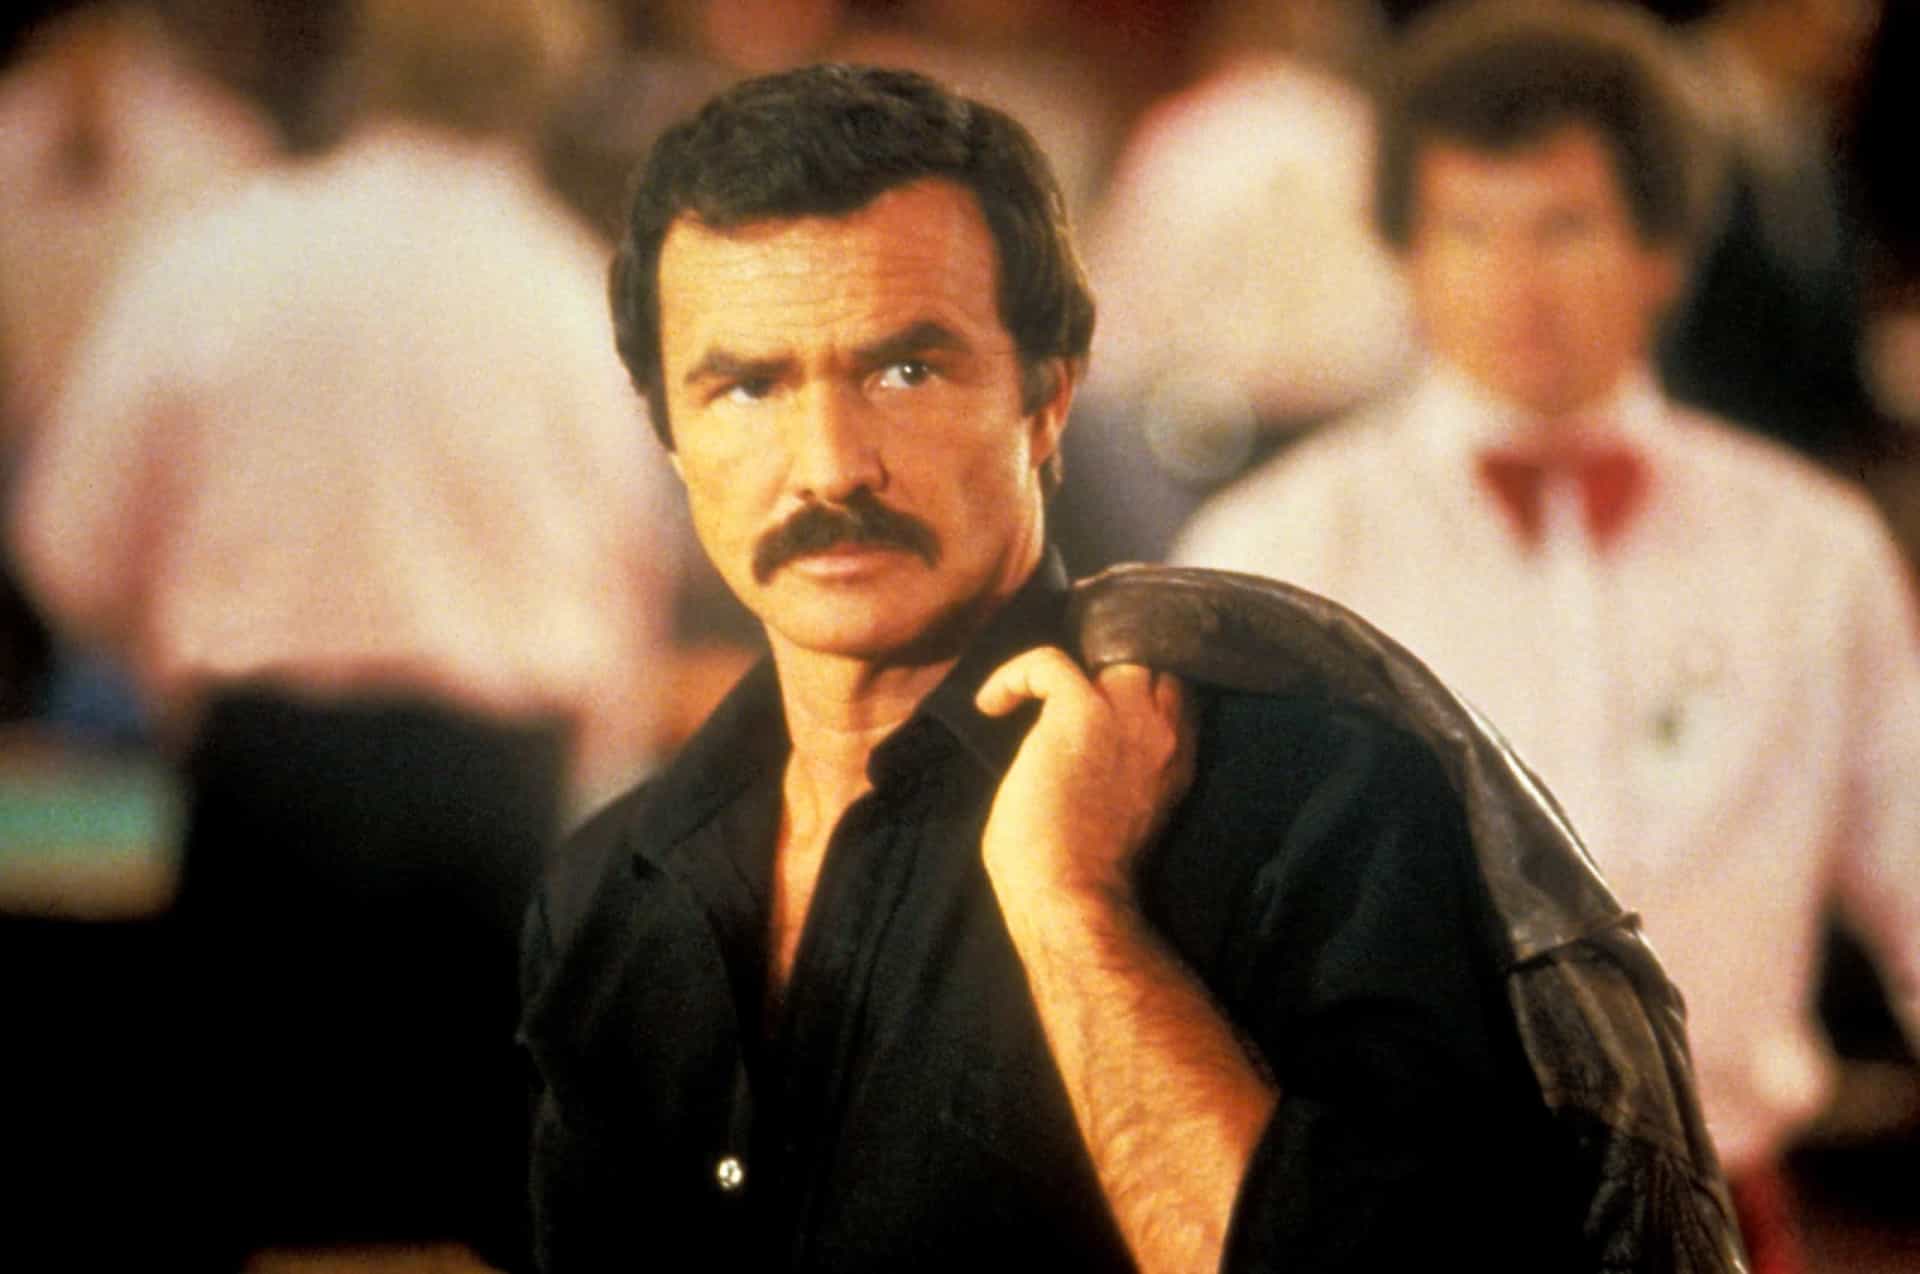 <p>This movie stars Burt Reynolds playing a bodyguard with a gambling addiction who is trying to save up money to leave Las Vegas.</p><p><a href="https://www.msn.com/en-us/community/channel/vid-7xx8mnucu55yw63we9va2gwr7uihbxwc68fxqp25x6tg4ftibpra?cvid=94631541bc0f4f89bfd59158d696ad7e">Follow us and access great exclusive content everyday</a></p>